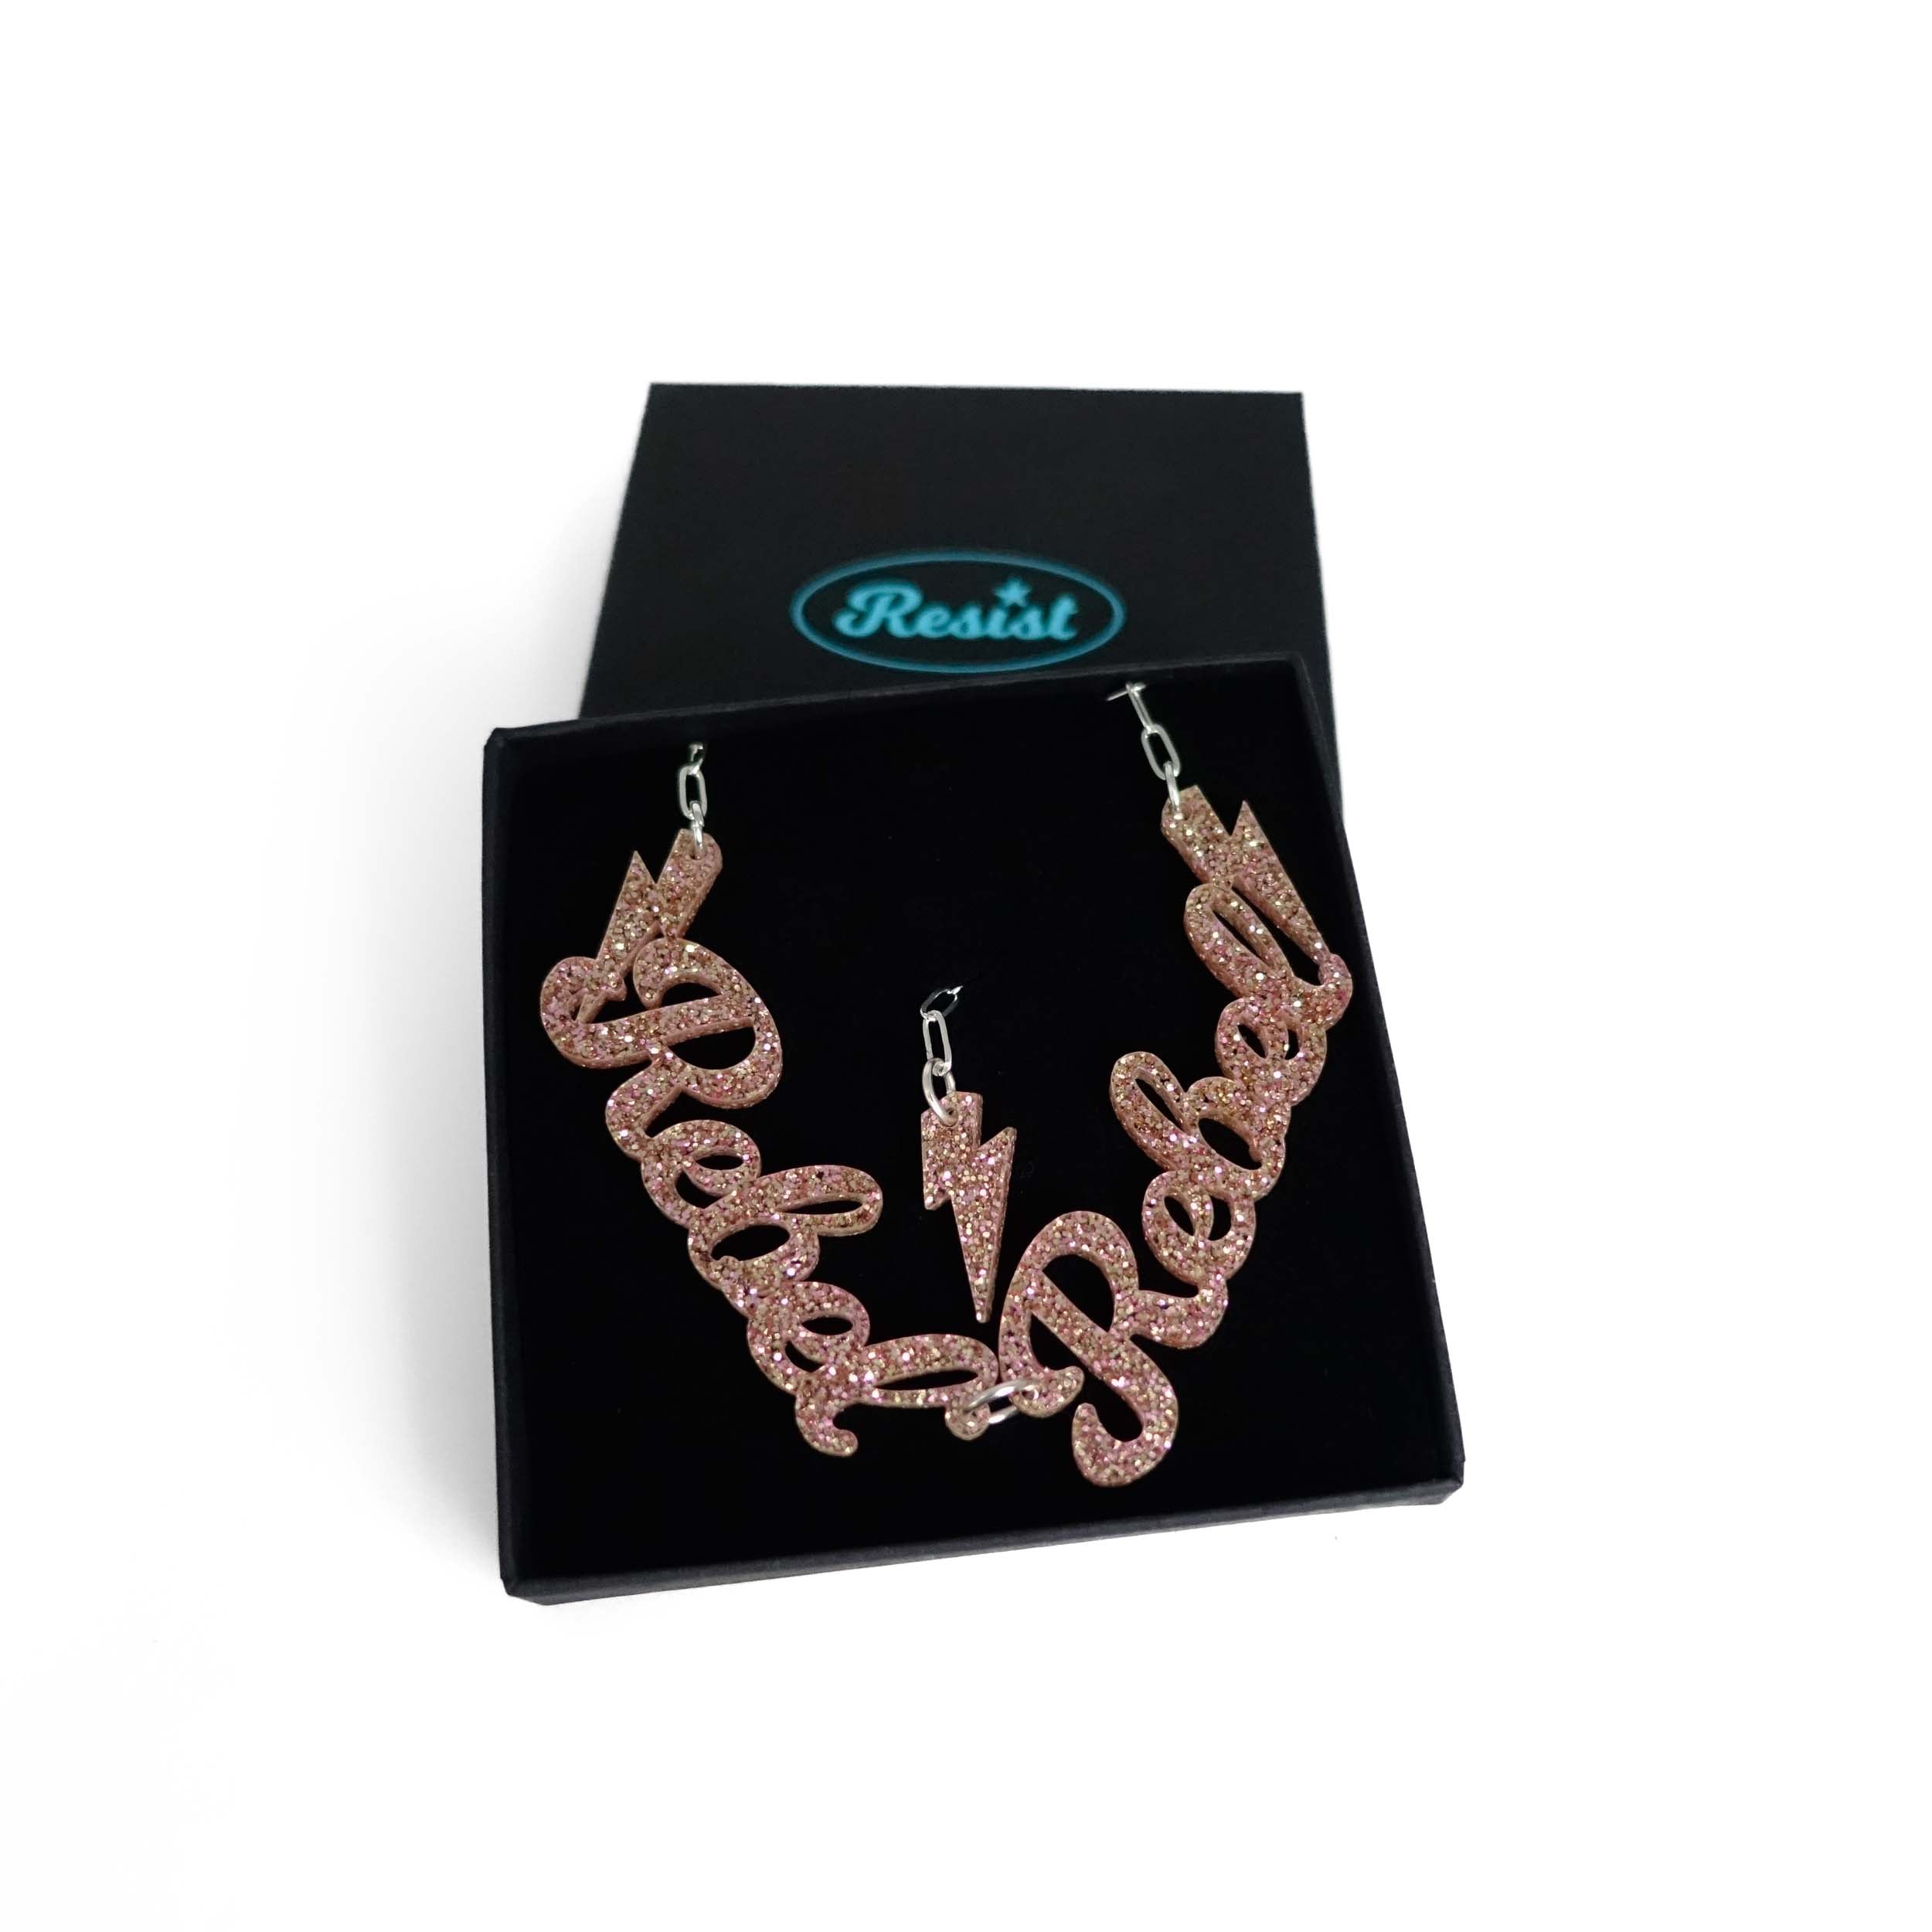 Champagne glitter Rebel Rebel necklace shown in a Wear and Resist gift box. 